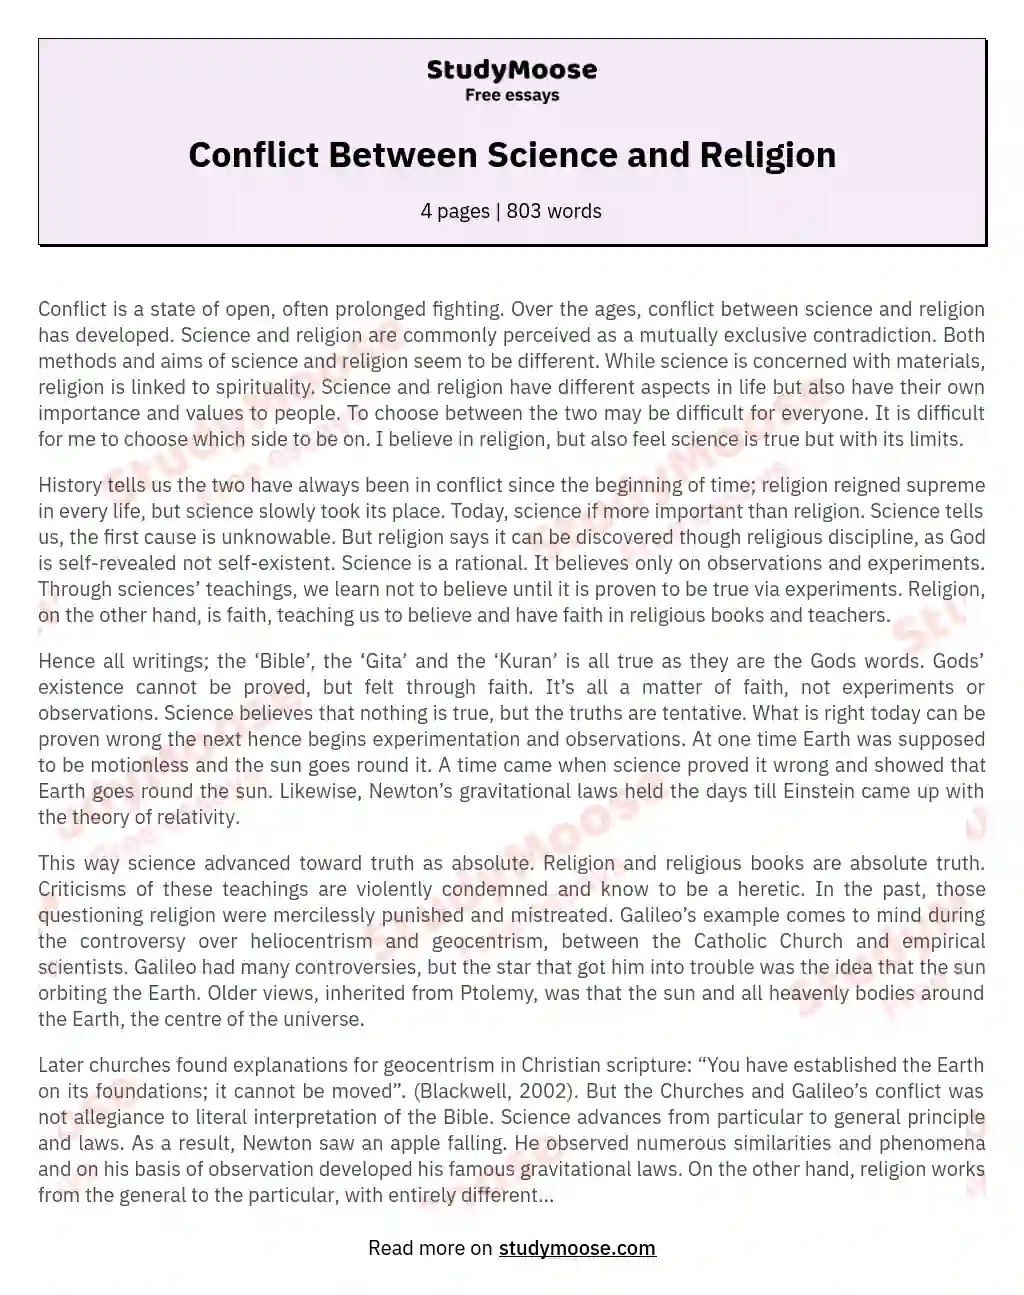 Conflict Between Science and Religion essay